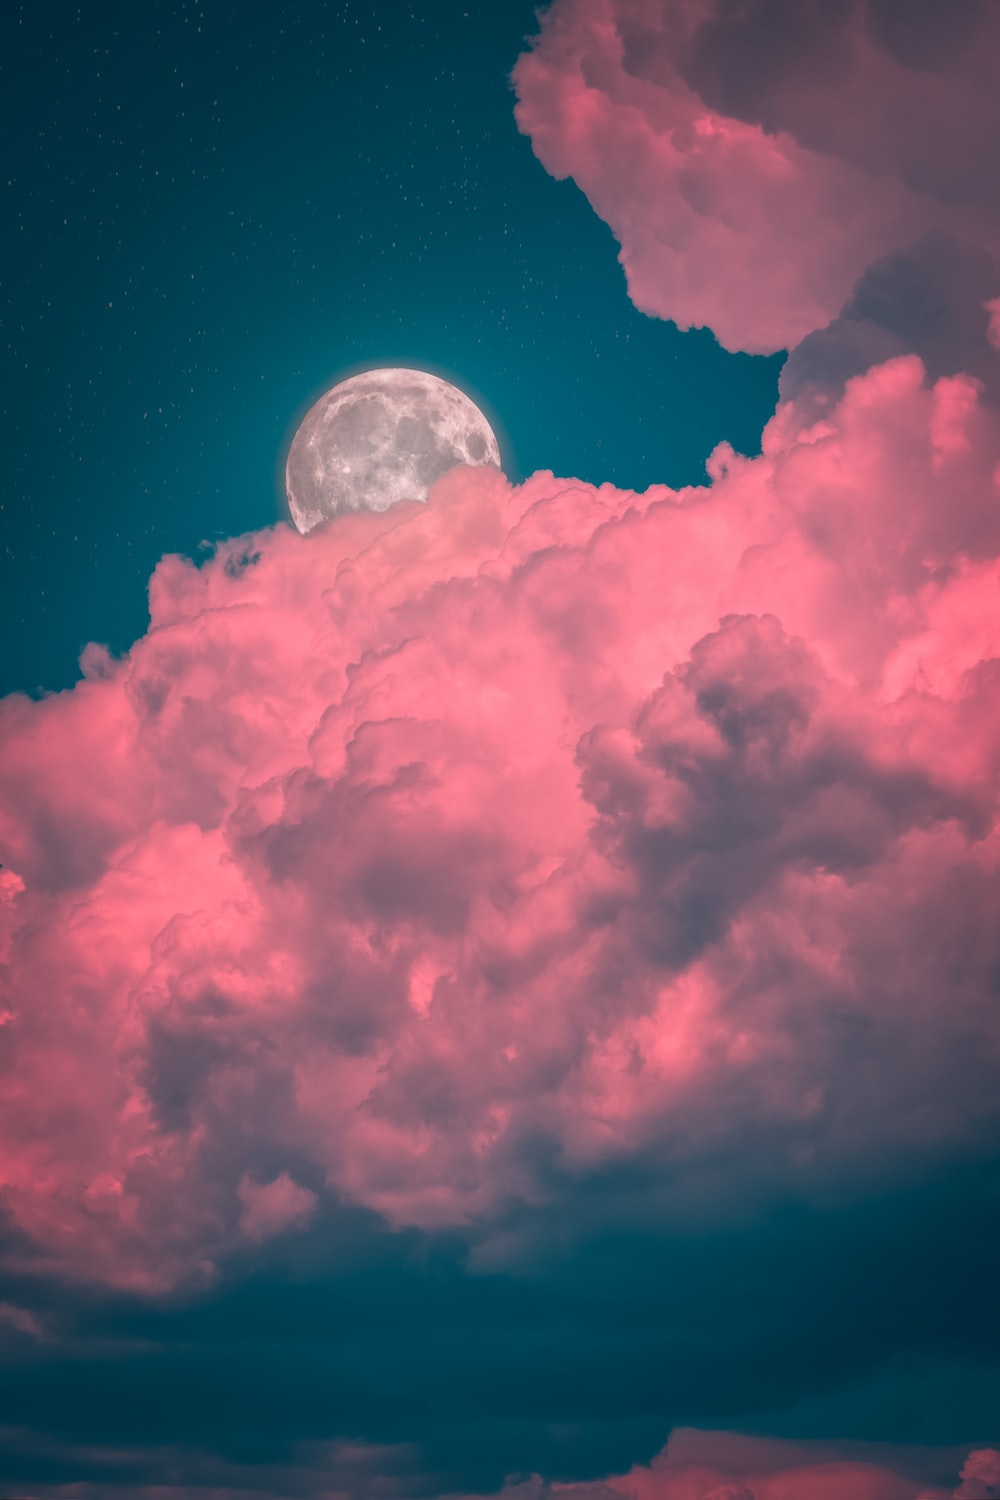 1K+ Moon And Clouds Picture. Download Free Image